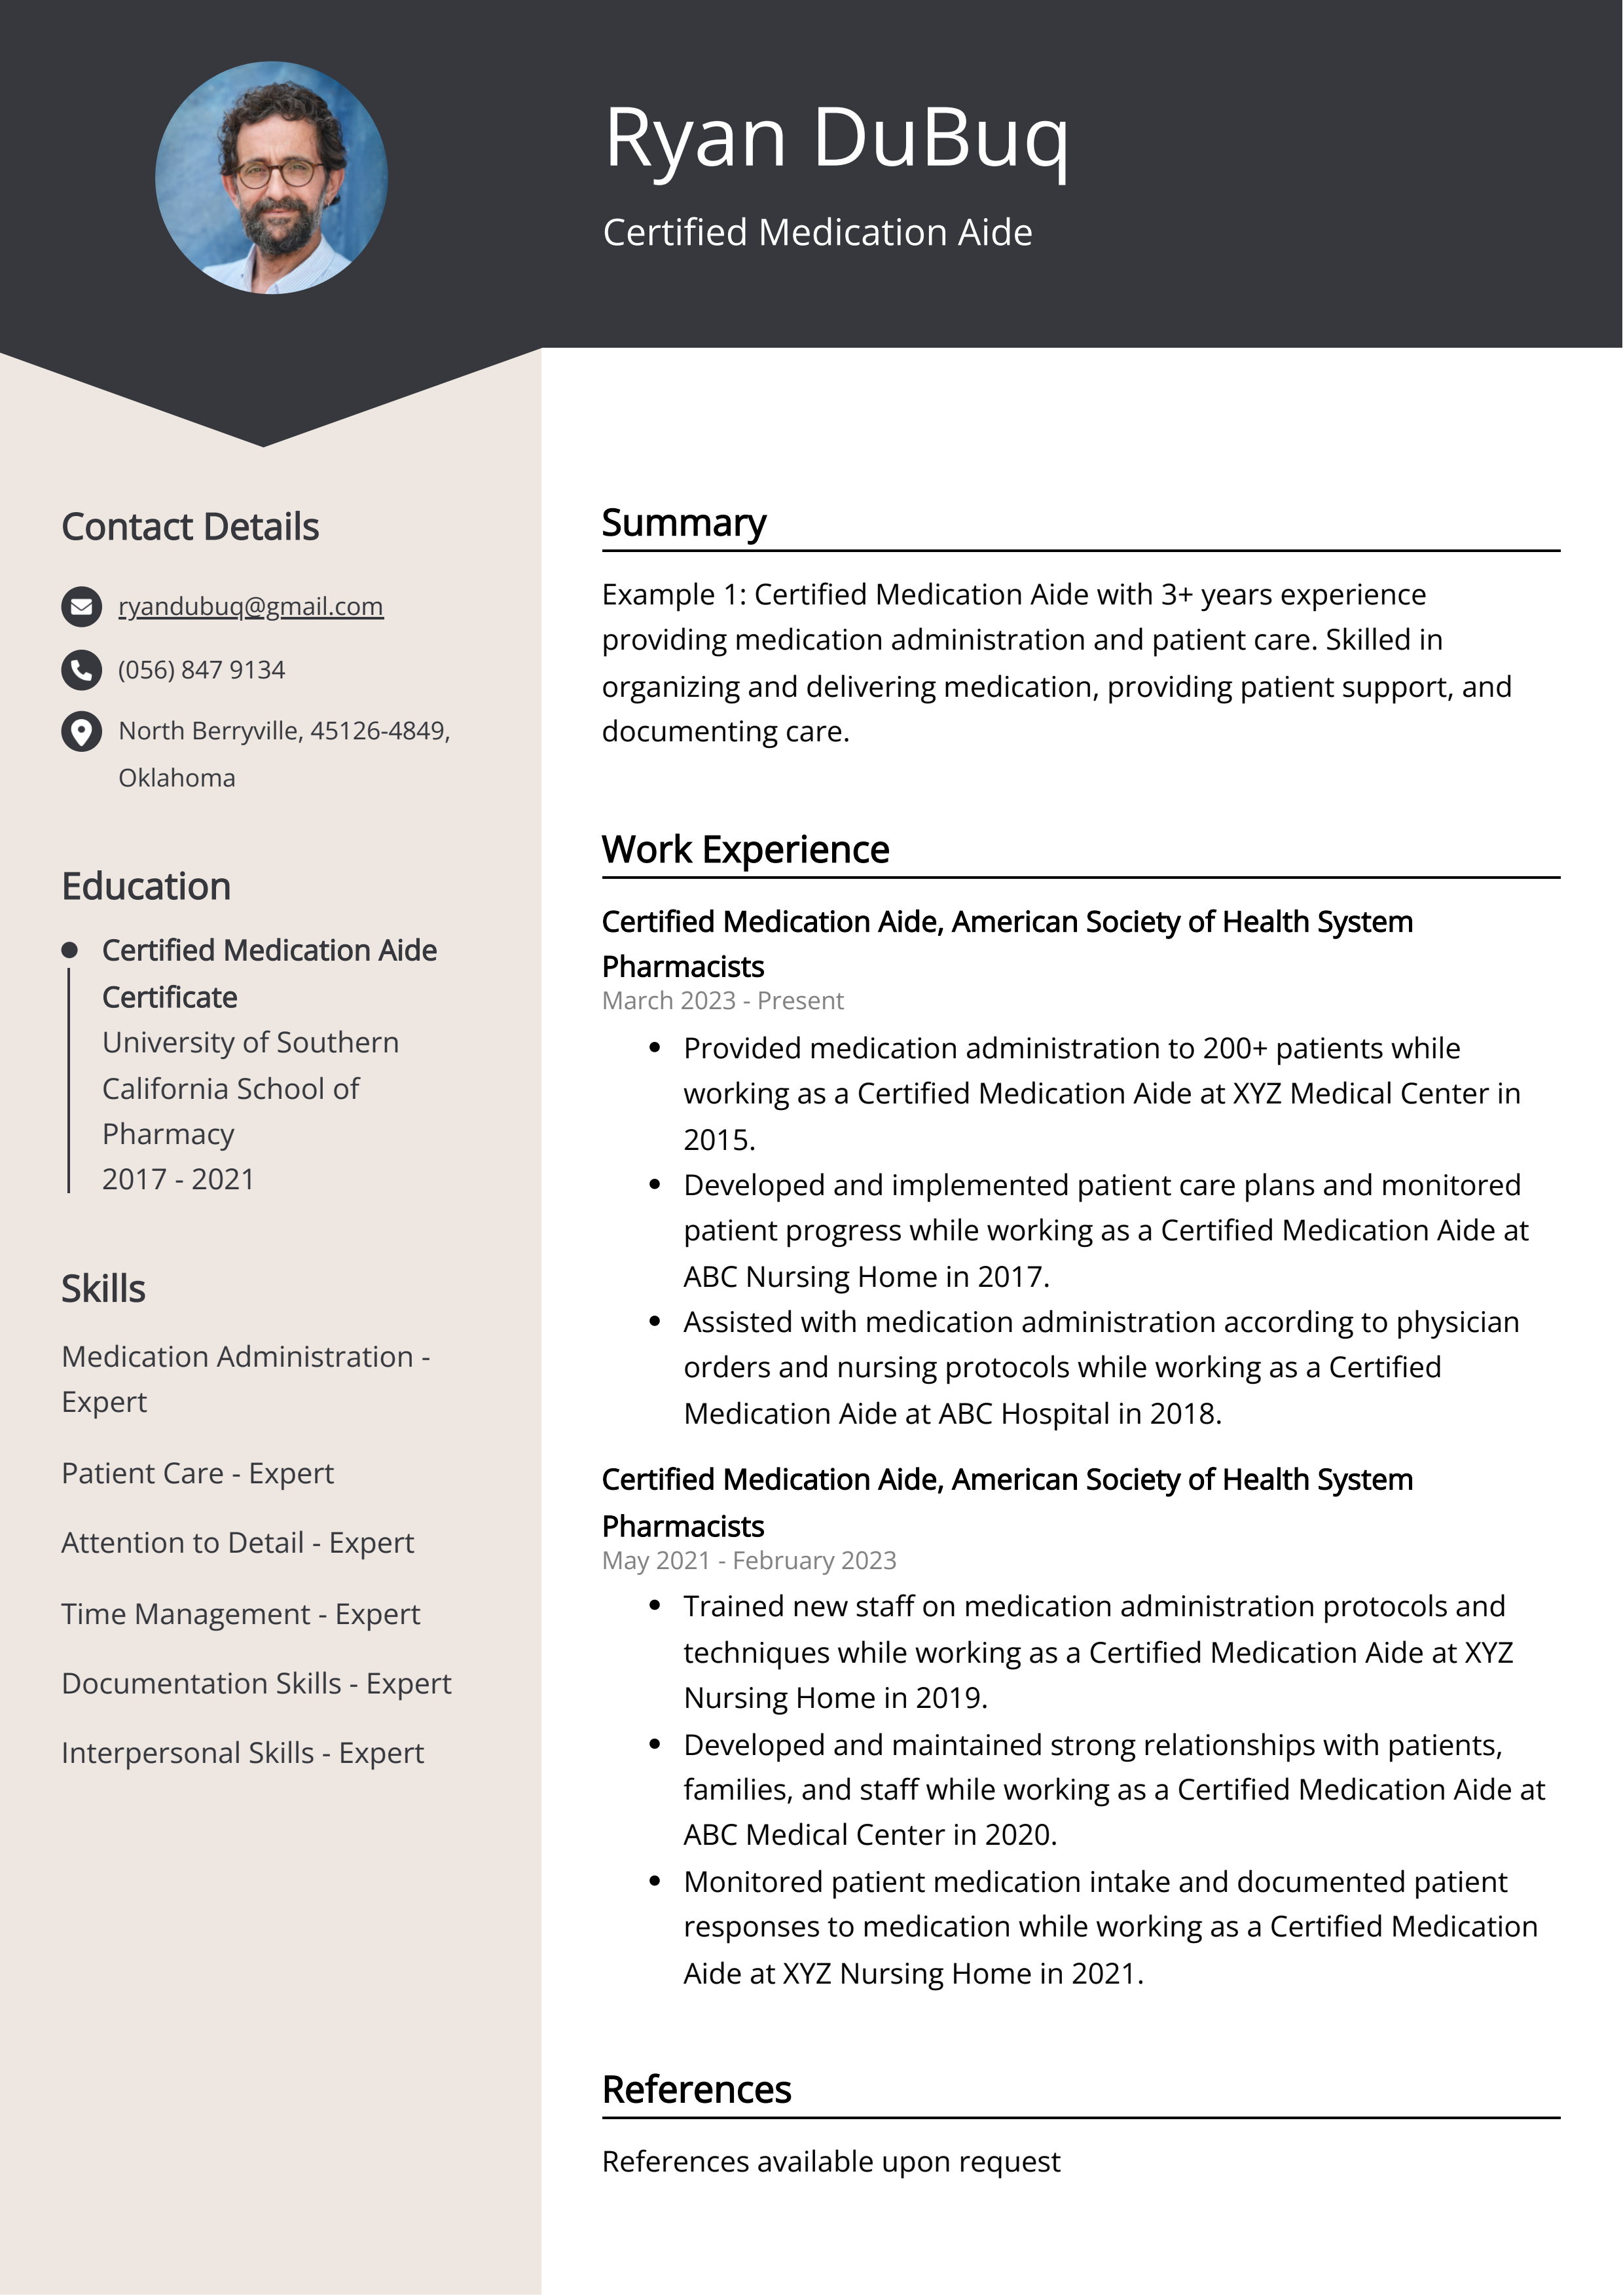 Certified Medication Aide CV Example